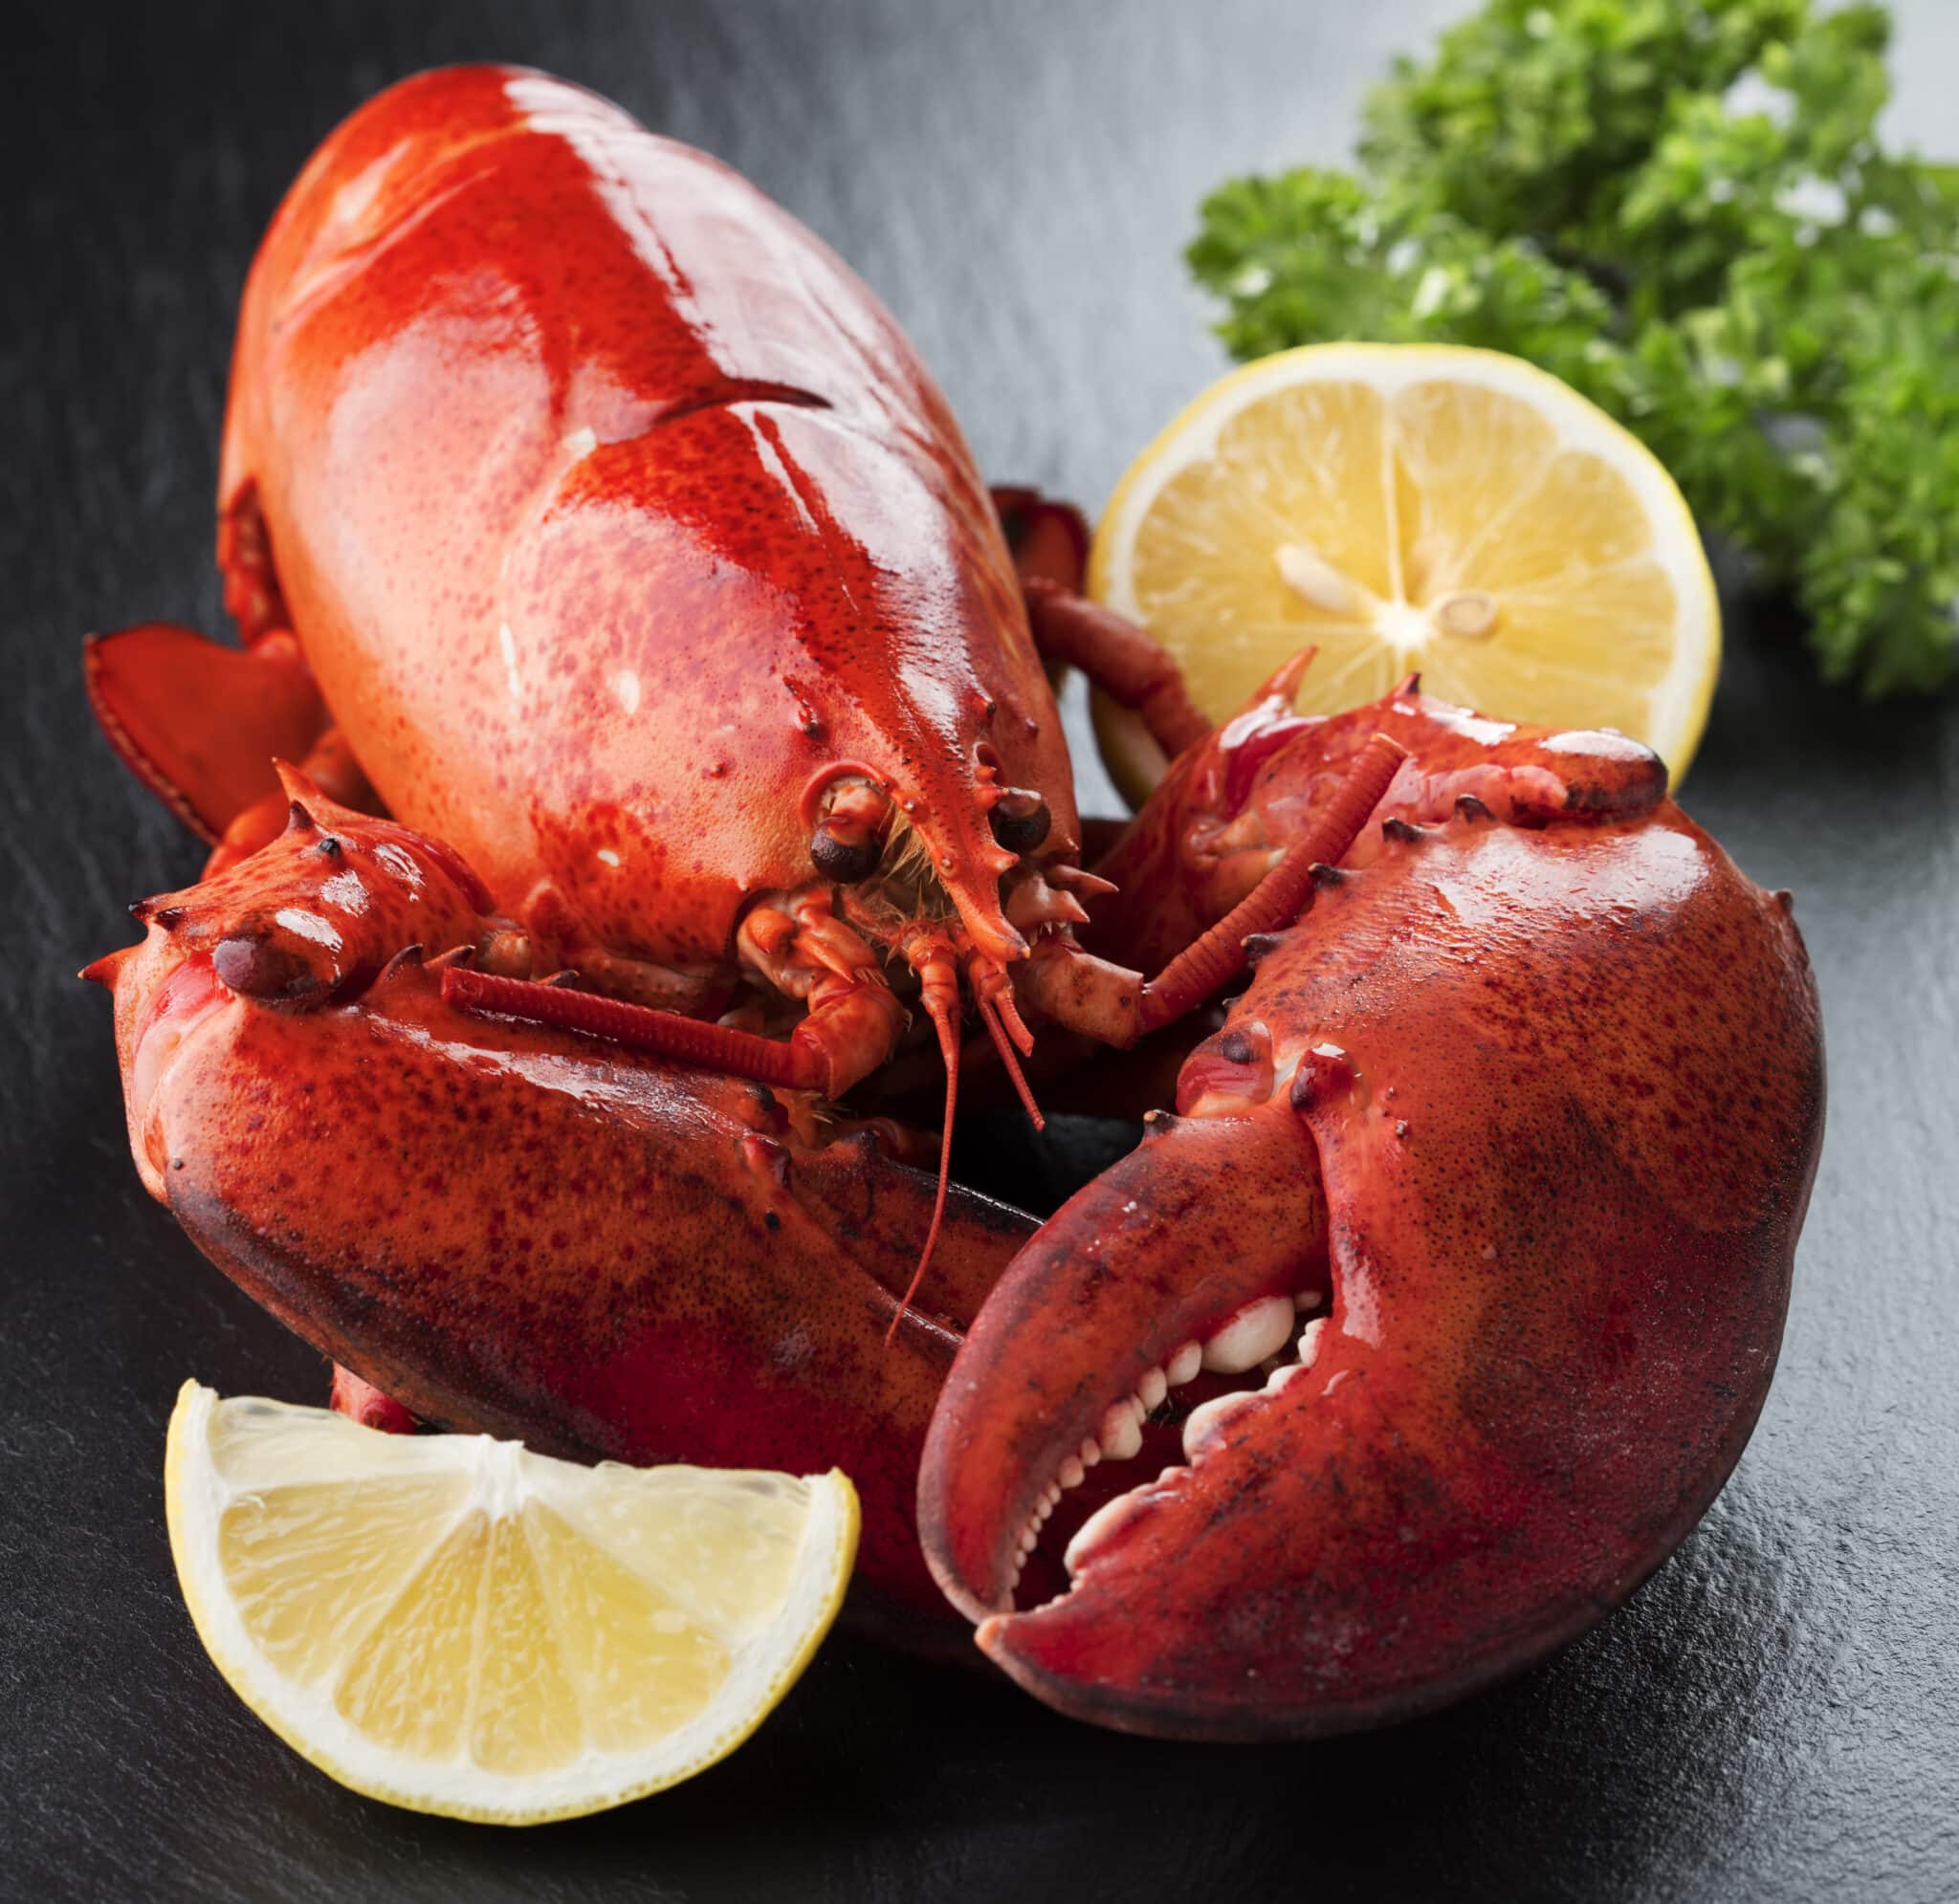 Freshly cooked lobster on a dark counter with a lemon wedge.